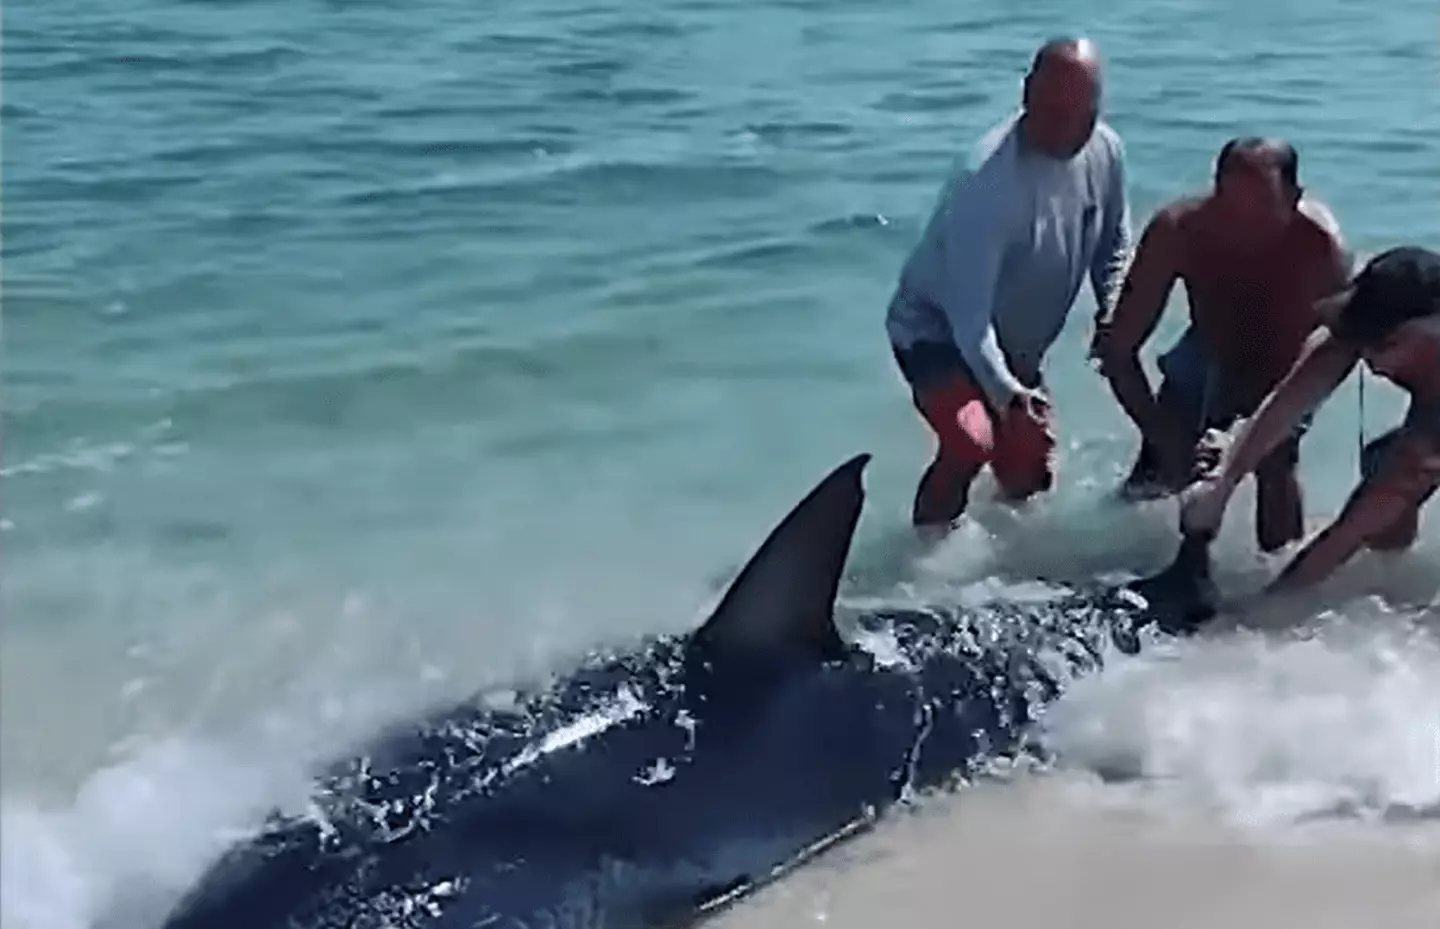 Thankfully, both humans and shark survived.